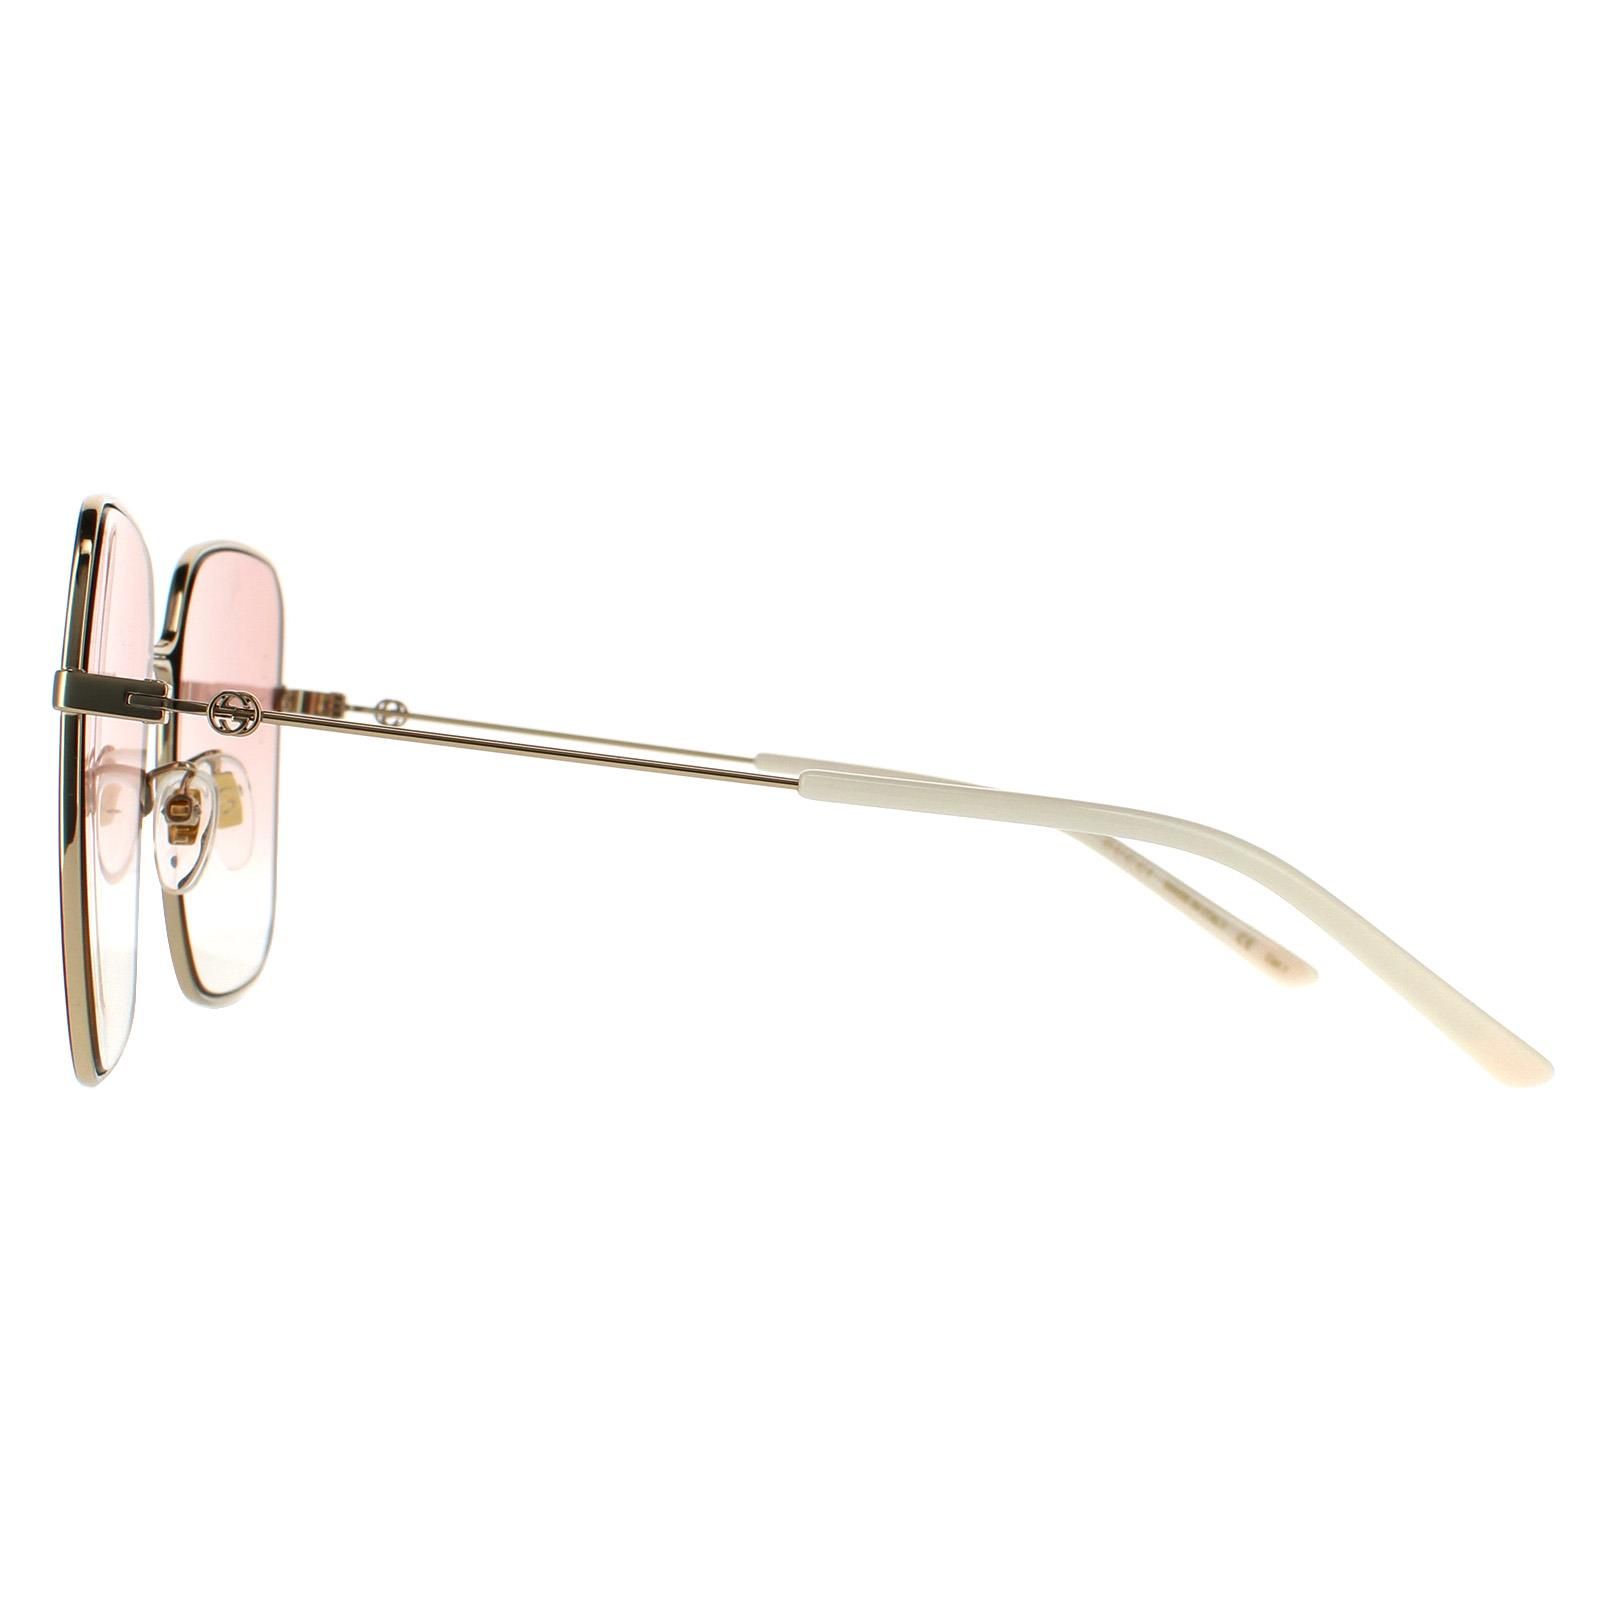 Gucci Square Womens Gold with Green and Red Pink Gradient Sunglasses GG0443S are an oversized square style crafted from lightweight acetate. Adjustable nose pads and plastic temple tips allow a personalised fit. To finish the look slender metal temples feature the Gucci emblem.